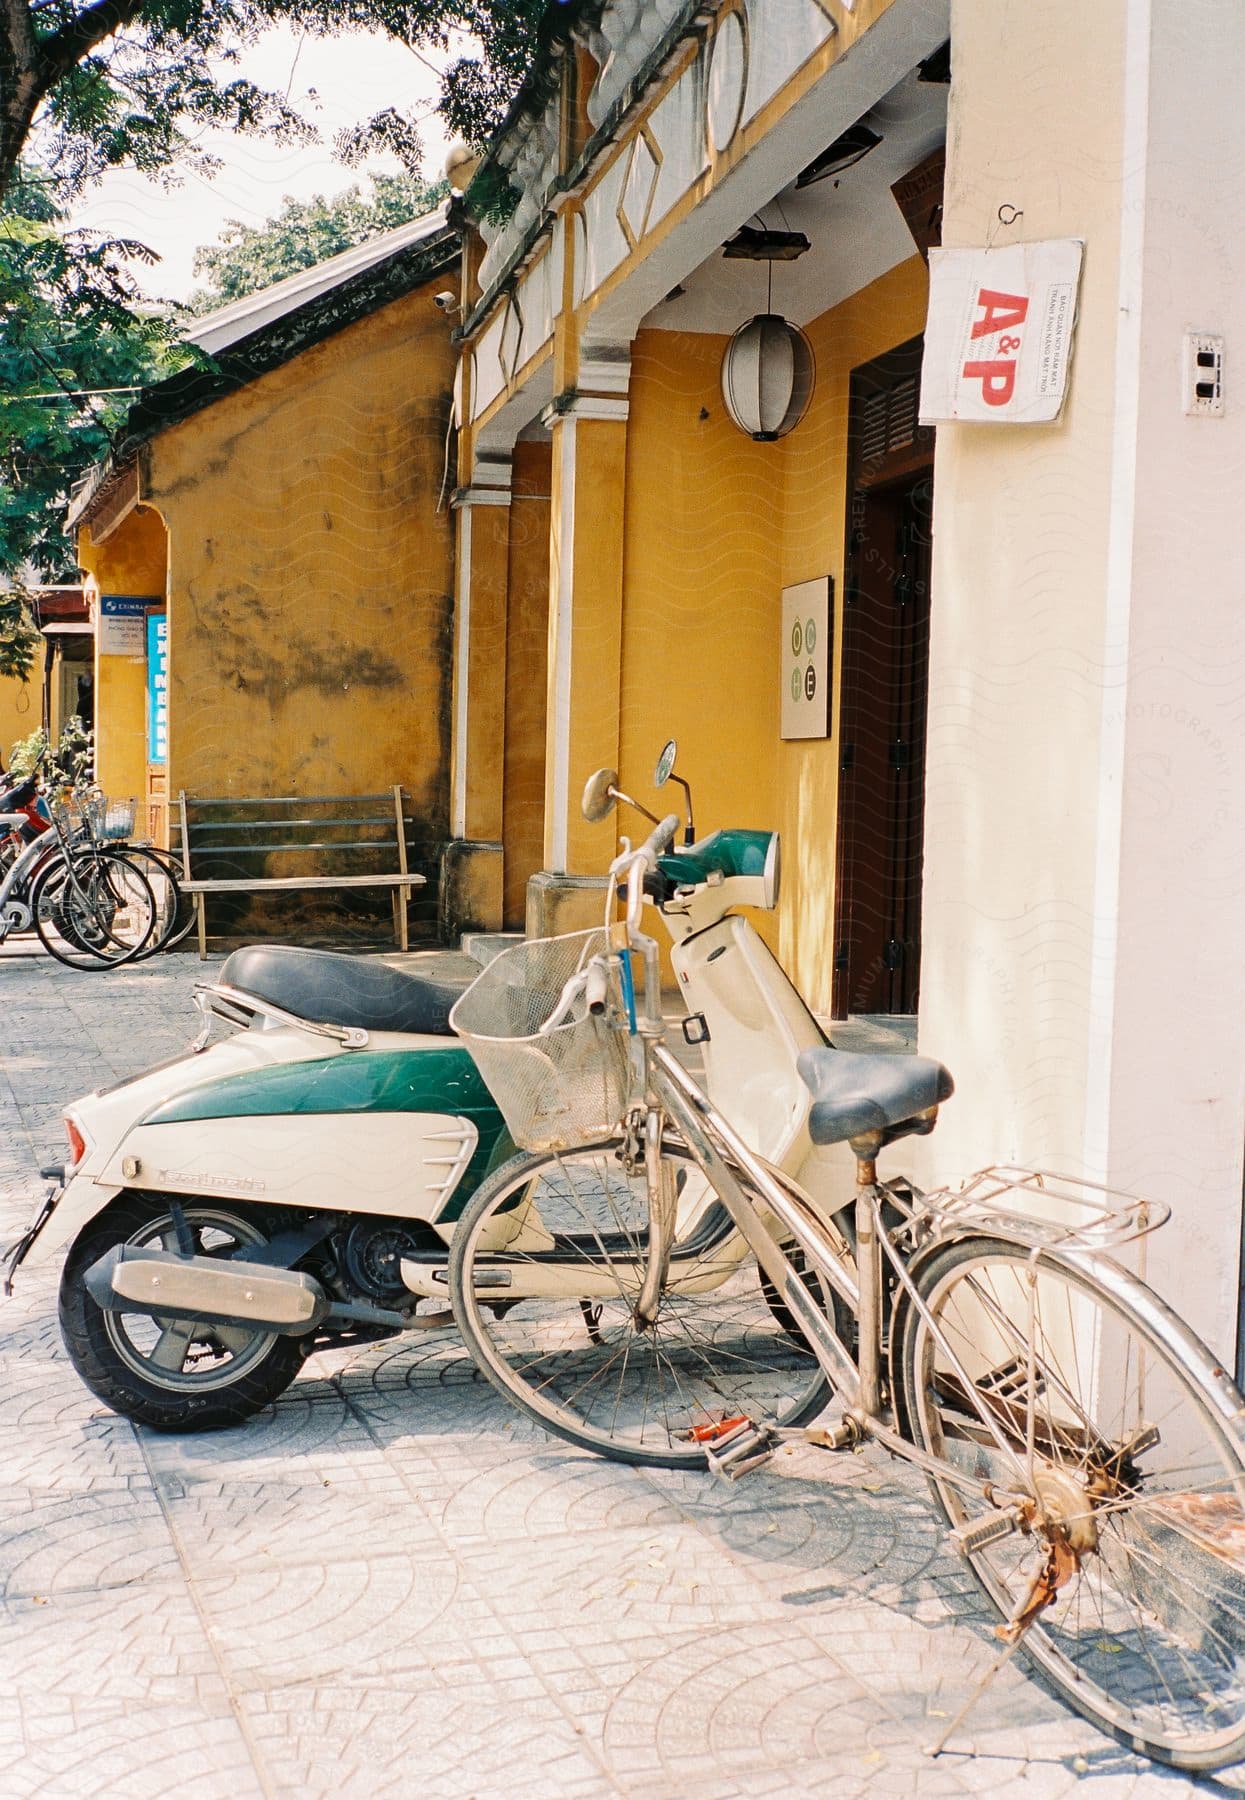 A motorcycle and a bicycle parked next to each other in front of a bar